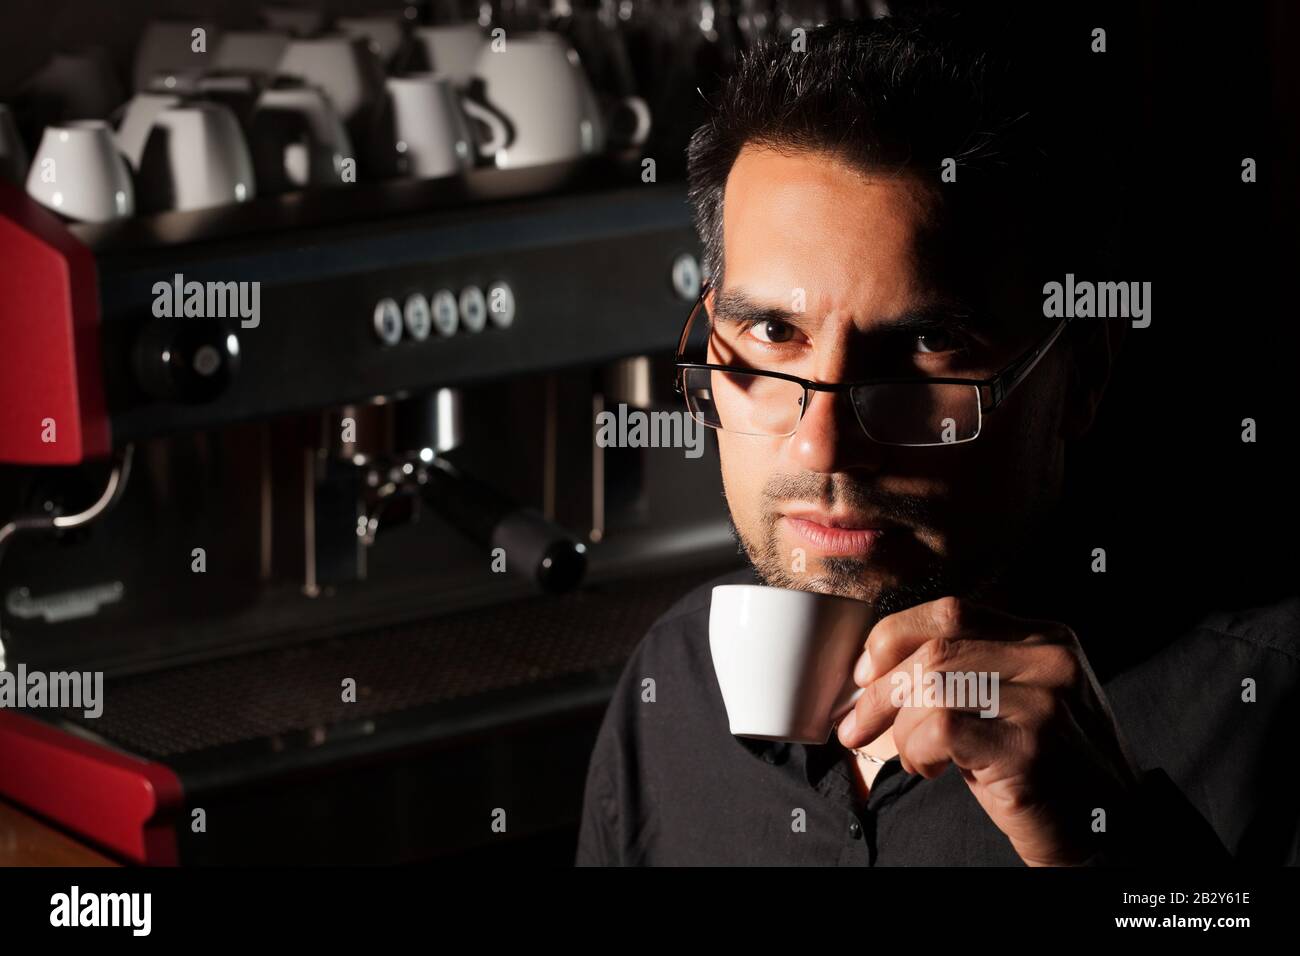 Coffee Sommelier Tasting Espresso Cup High Contrast Image Stock Photo